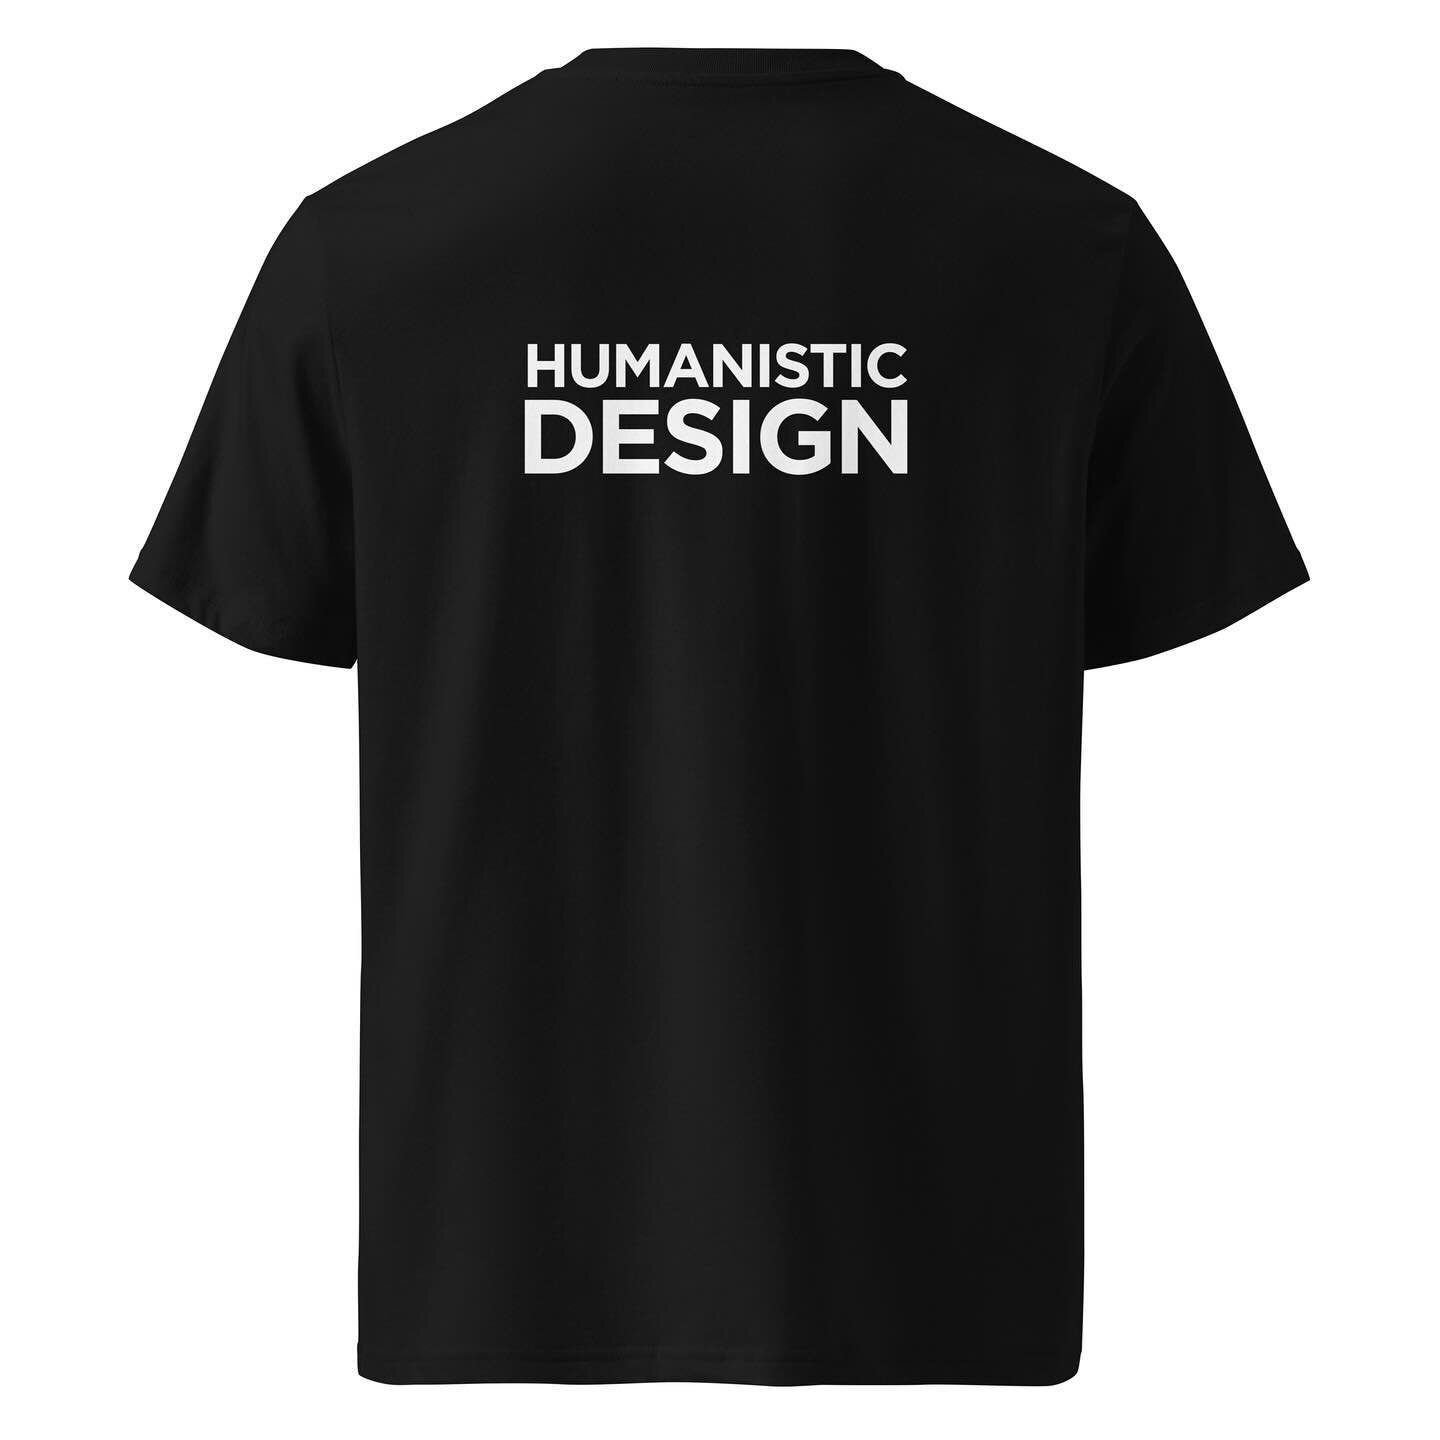 The Humanistic D Tee.